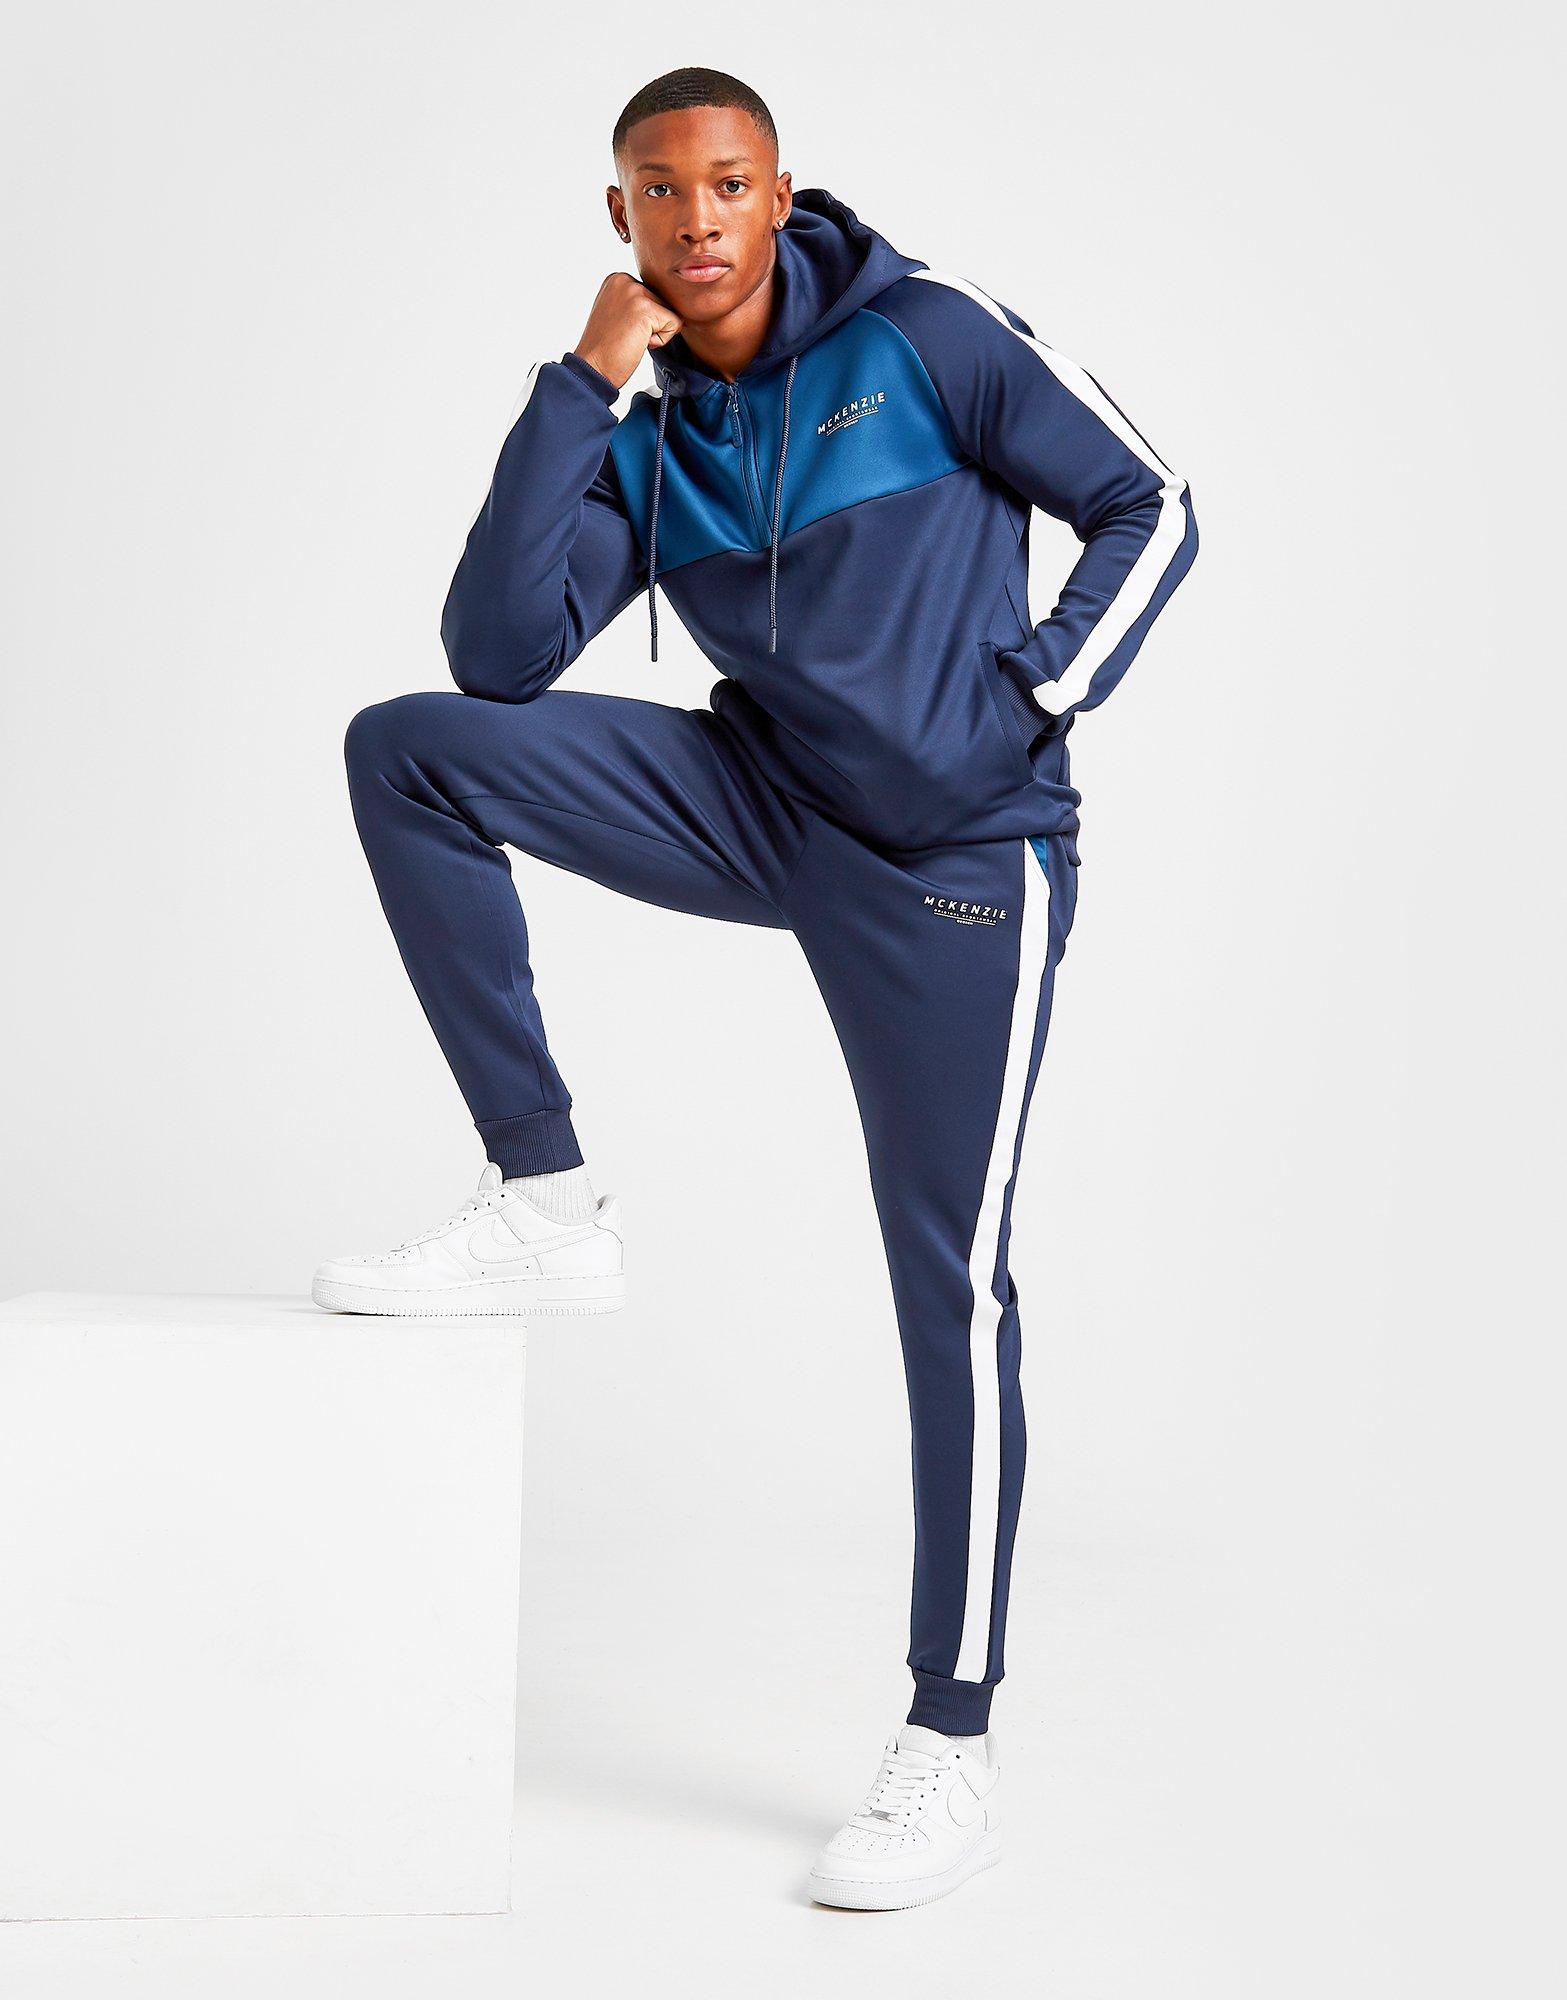 New McKenzie Men’s Exhilerate Tracksuit from JD Outlet | eBay